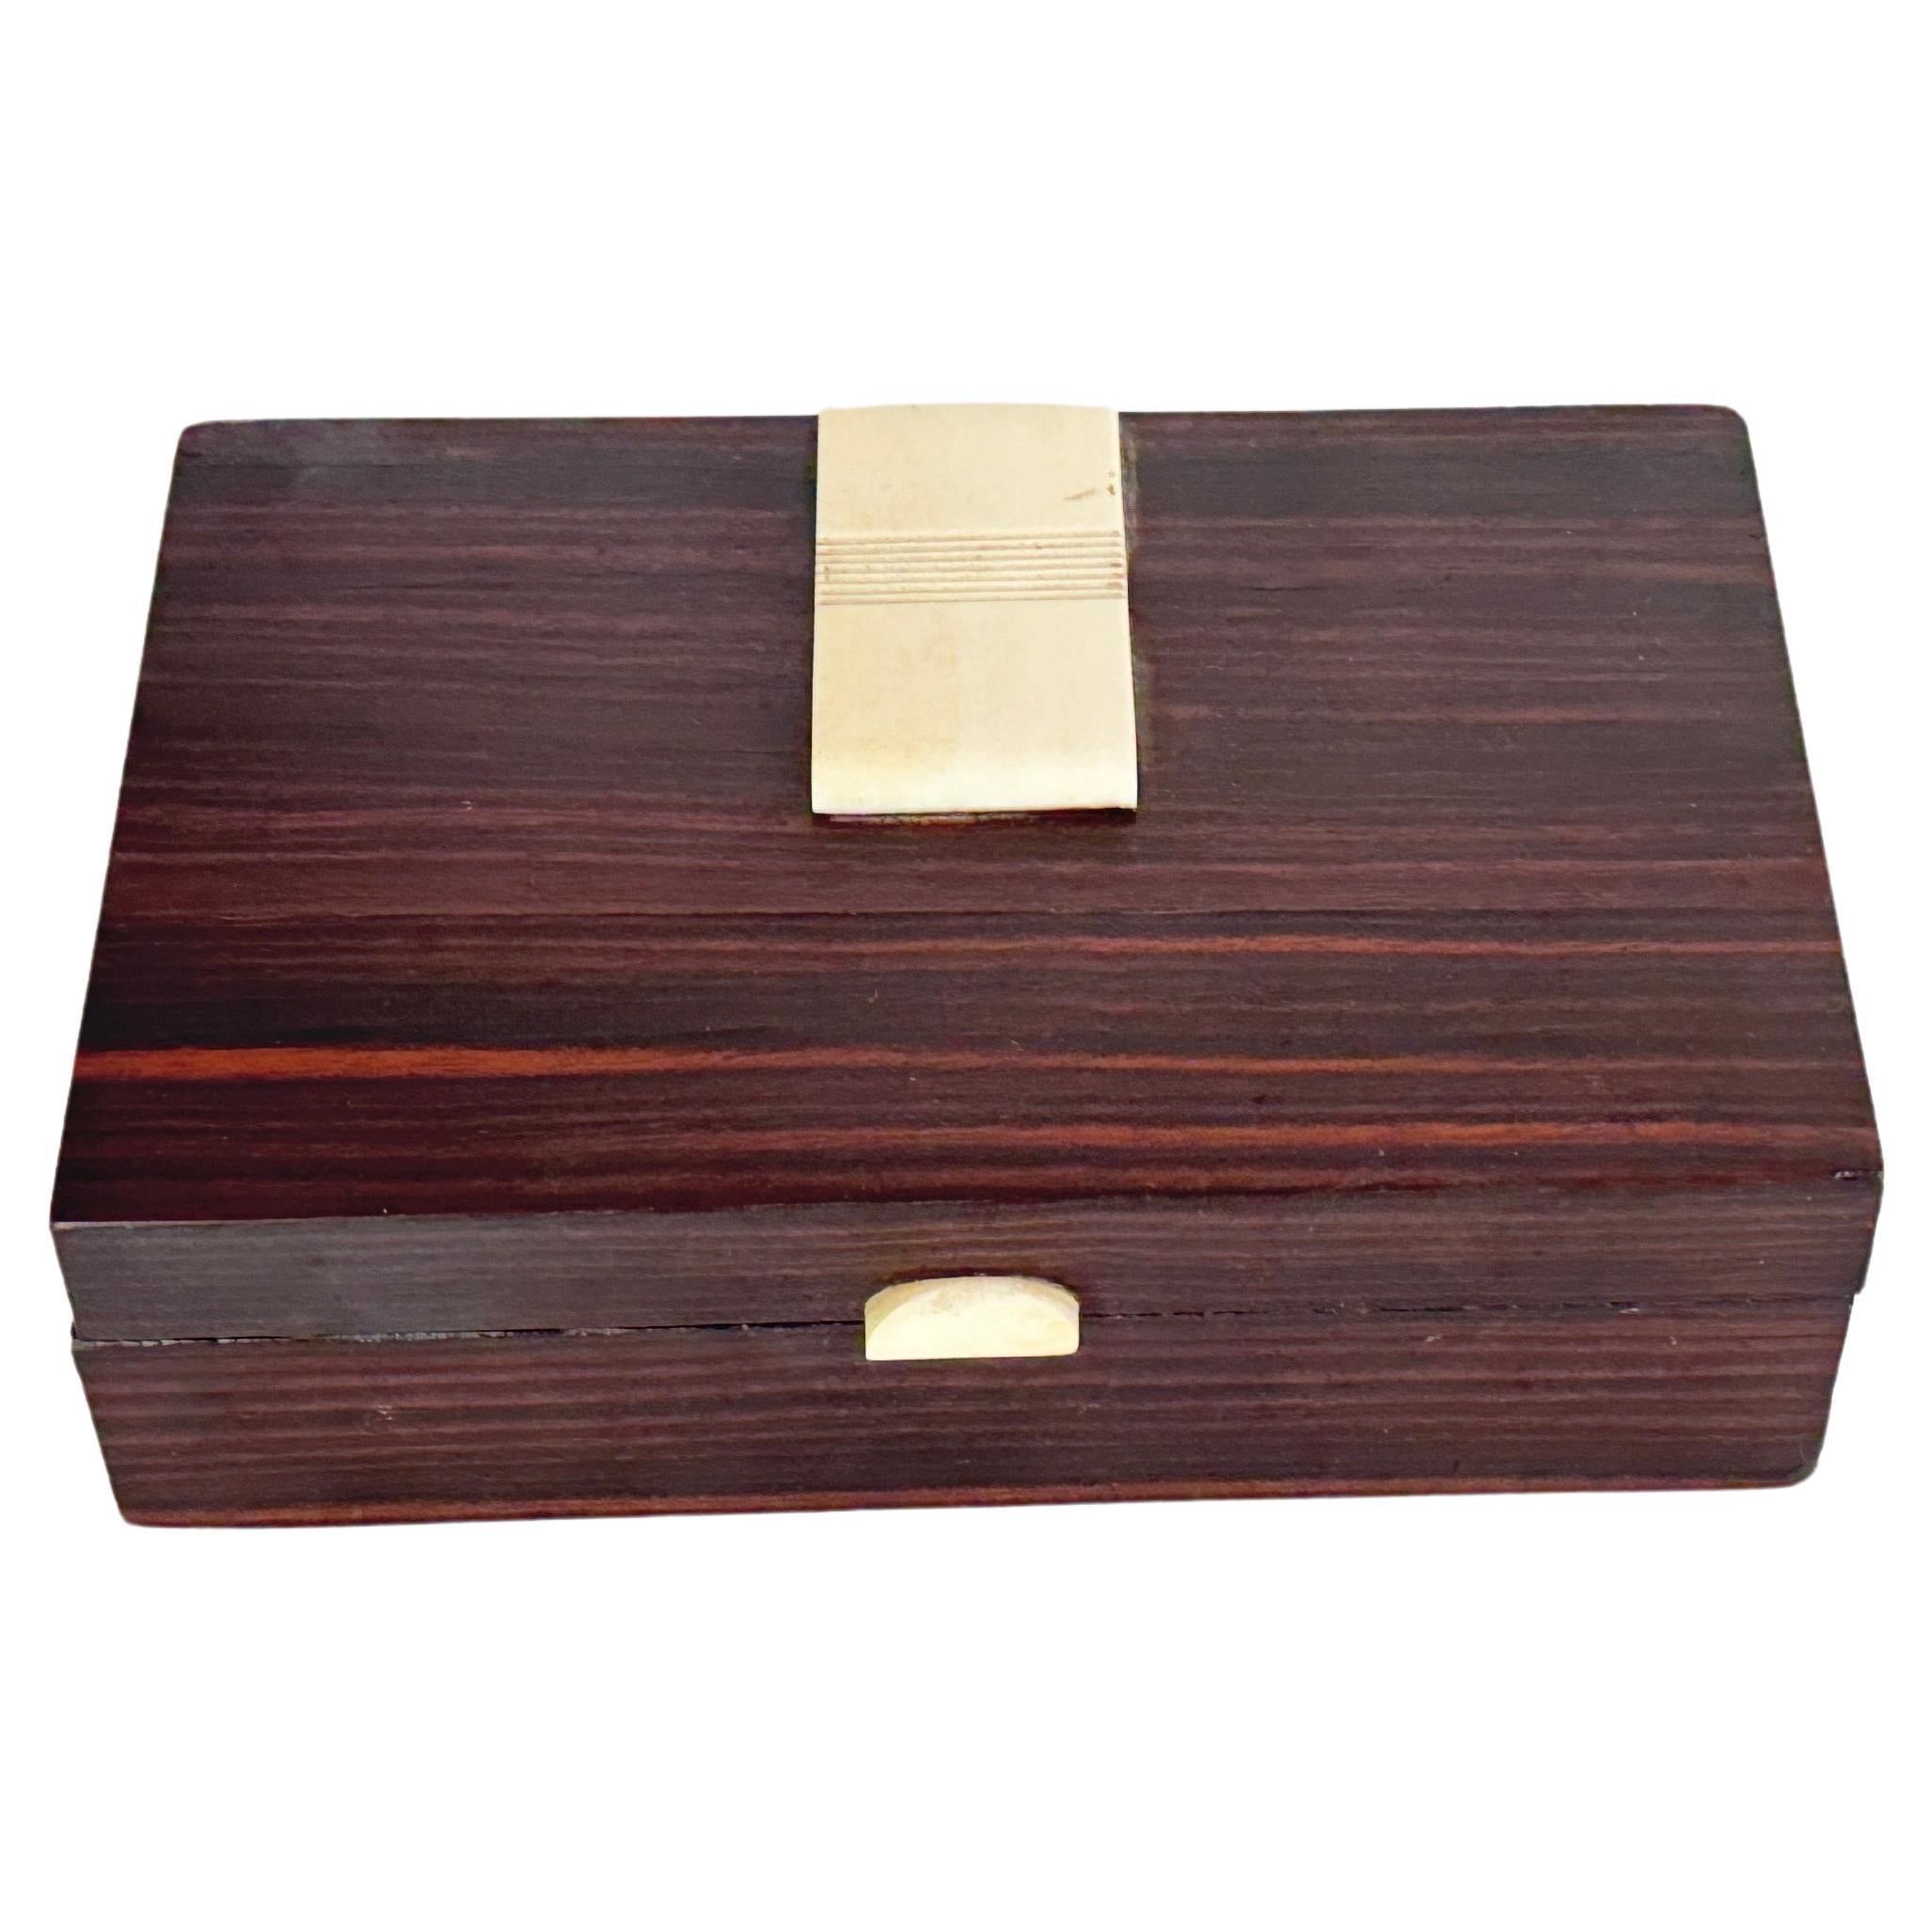 Decorative Box for Cigarettes in  wood and Bakelite brown and White color France